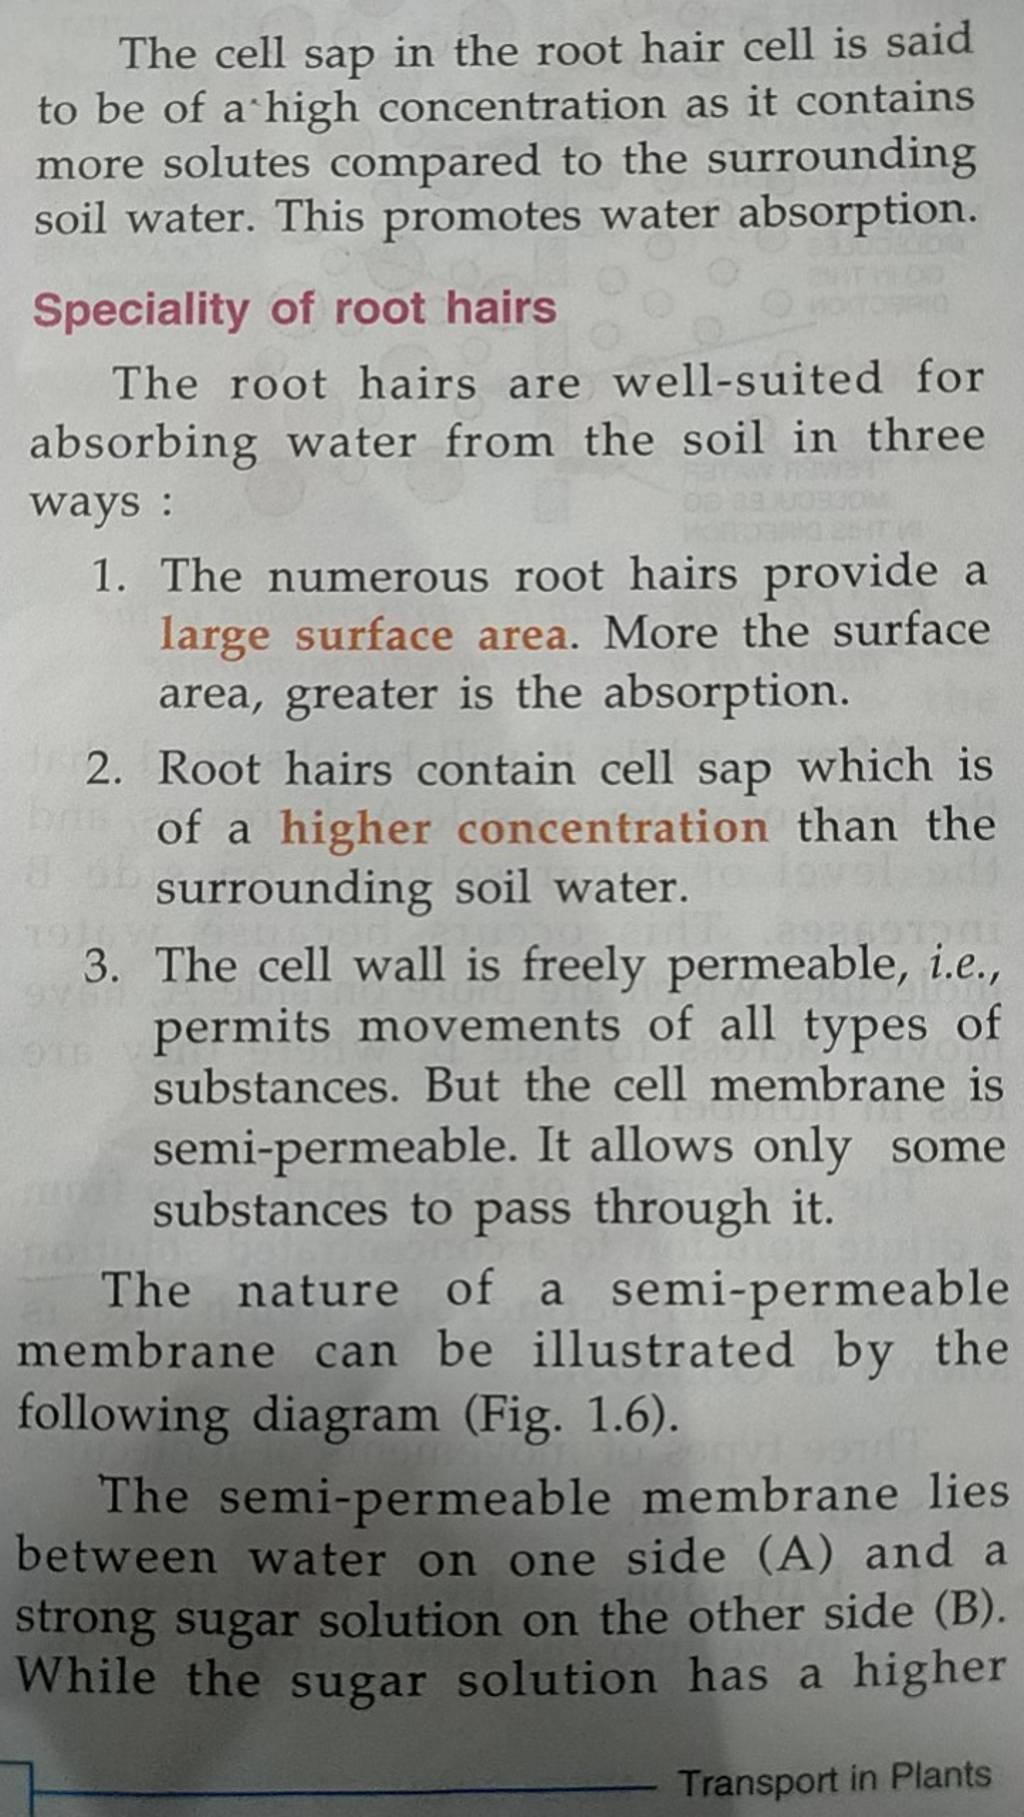 Draw a diagram of the root hair cell as it would appear when a con